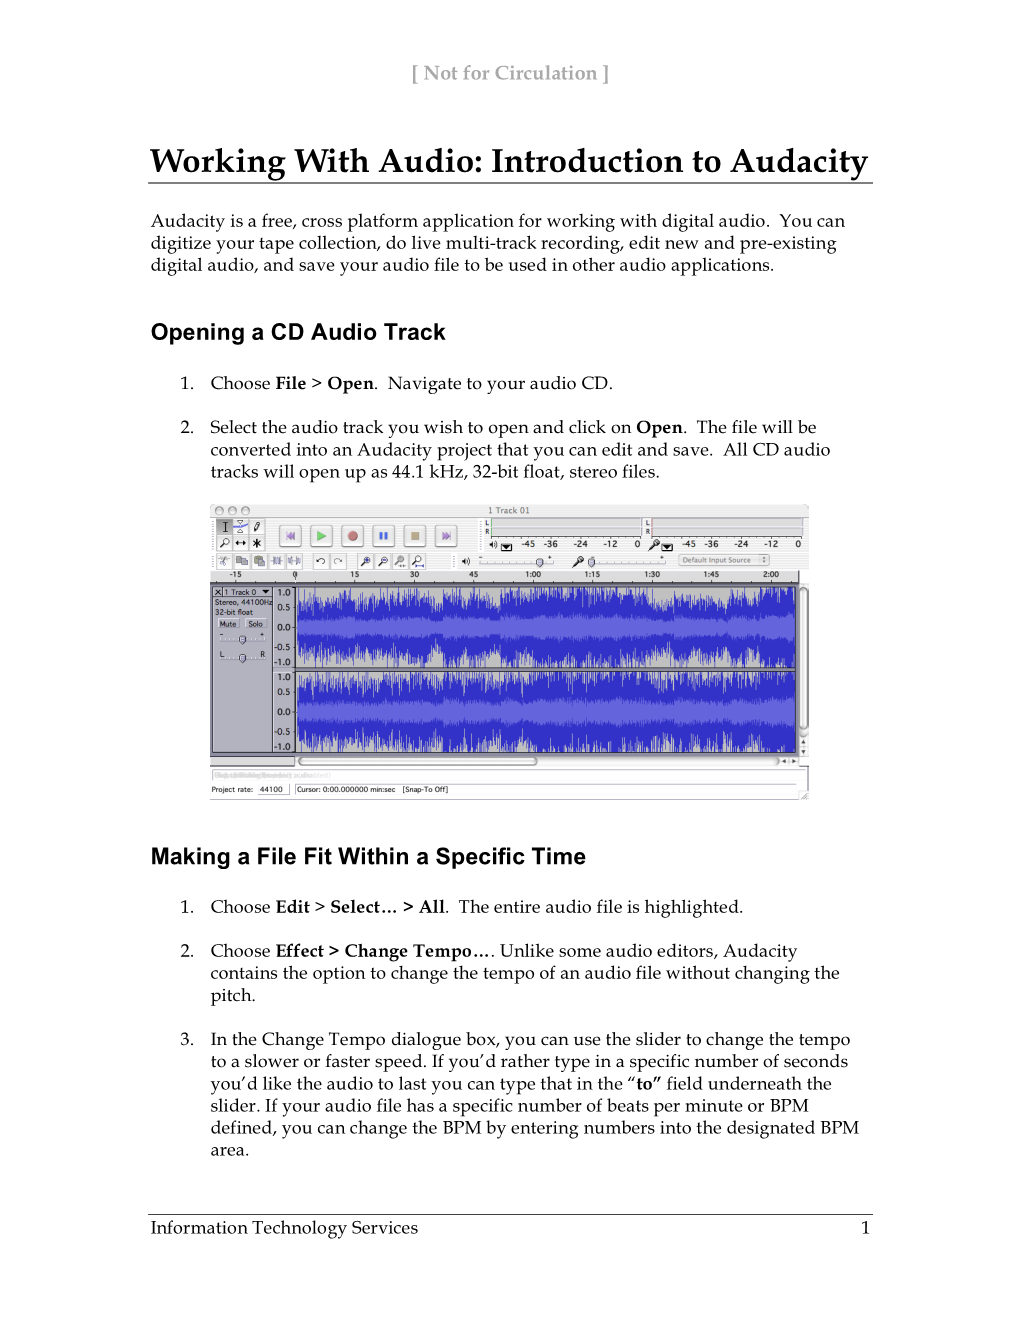 Working with Audio: Introduction to Audacity